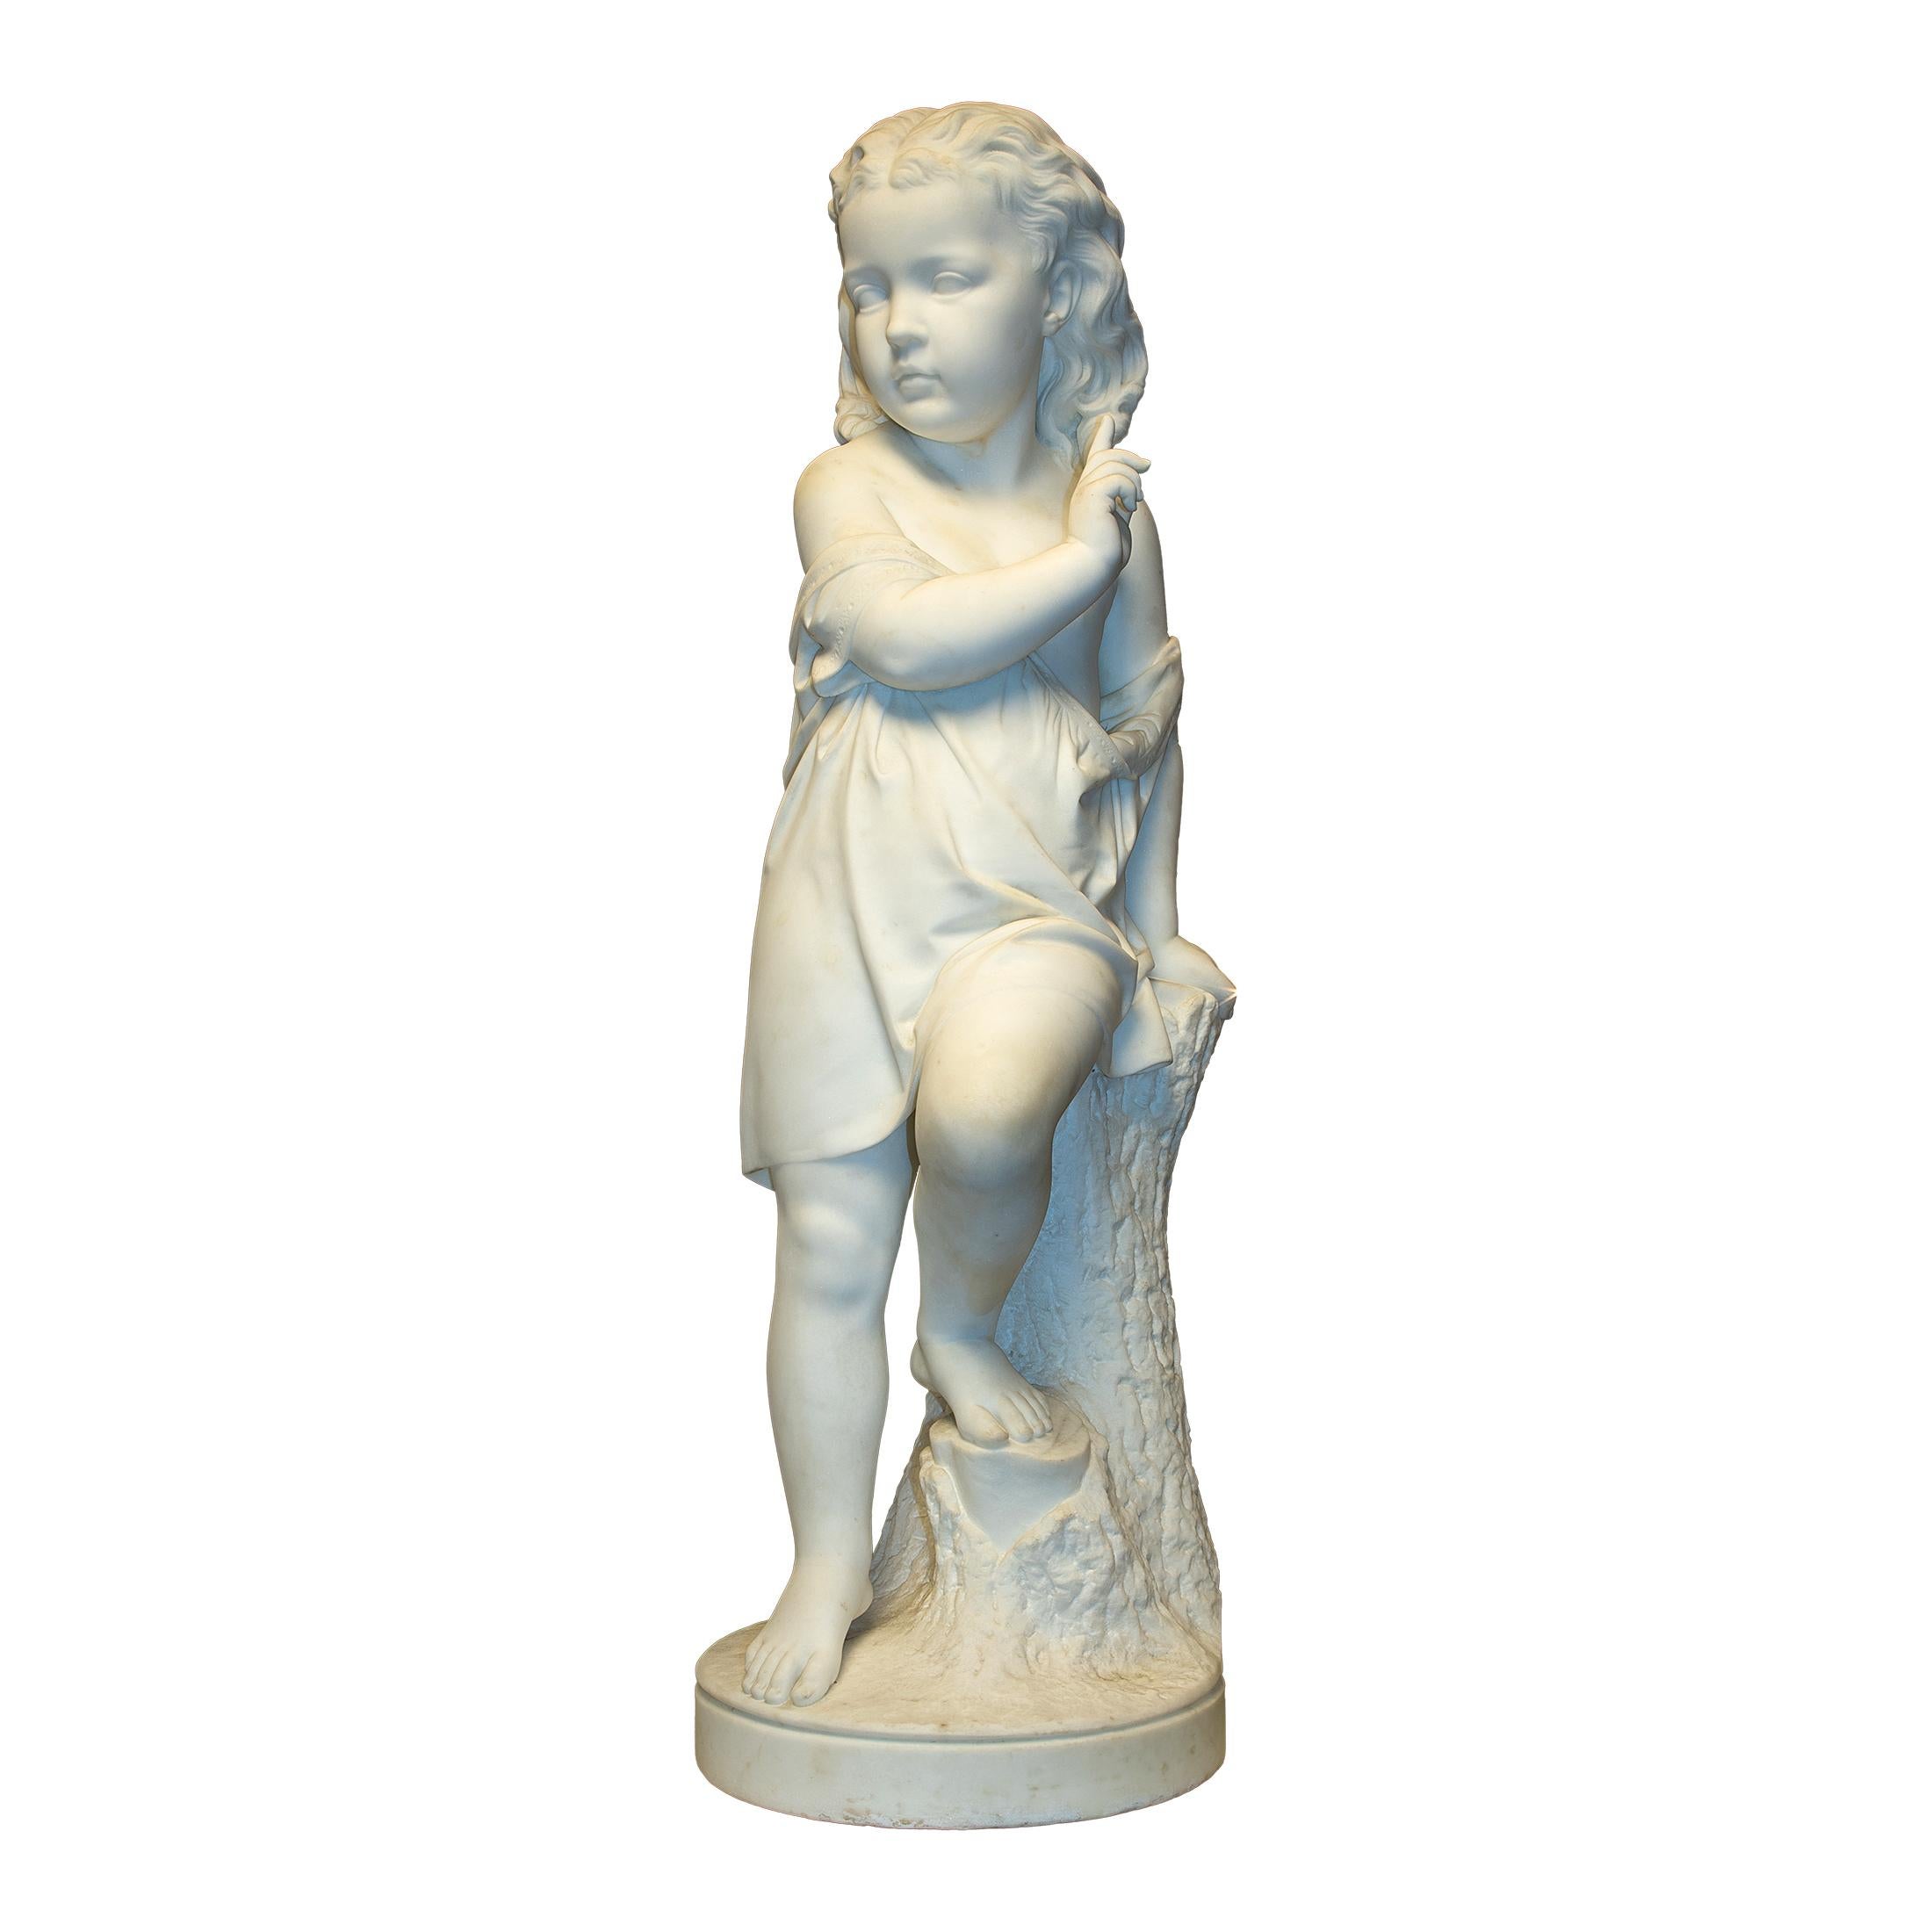 Francis John Williamson Figurative Sculpture - White Marble Sculpture Statue of a Girl by Francis Williamson